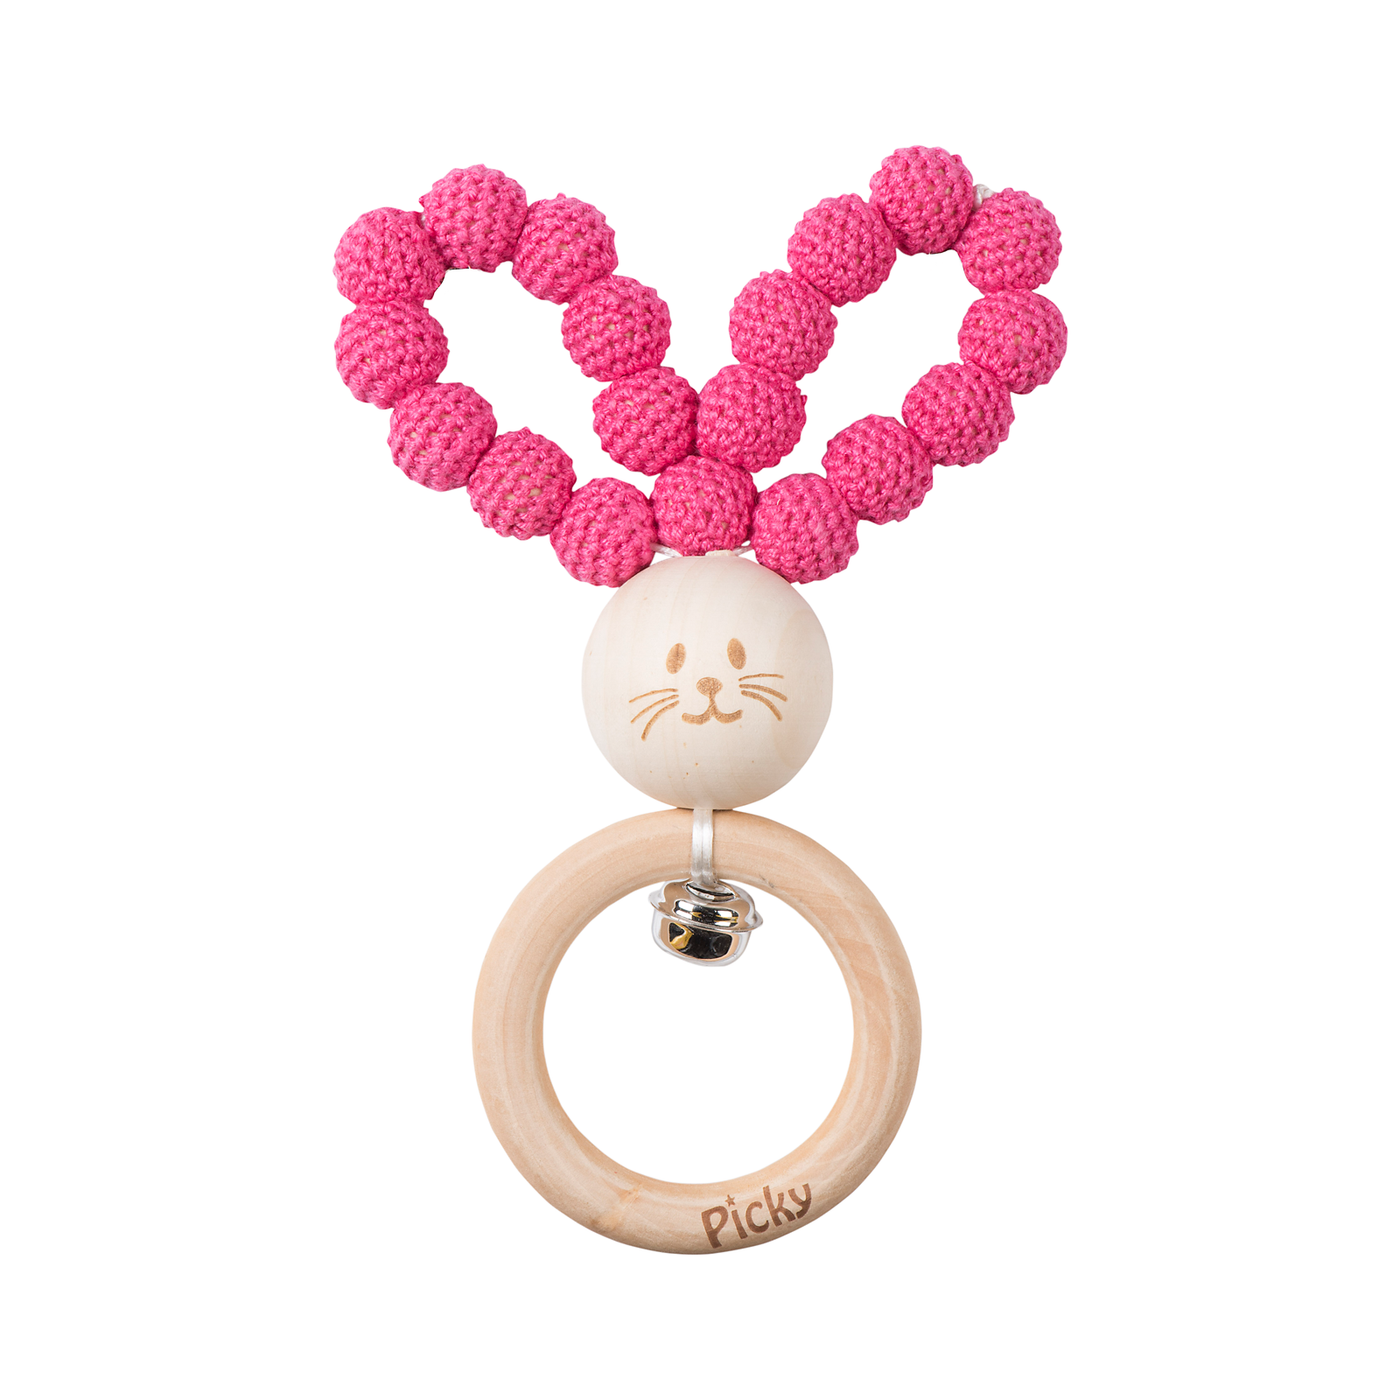 Picky Crochet Bunny Teether Pink